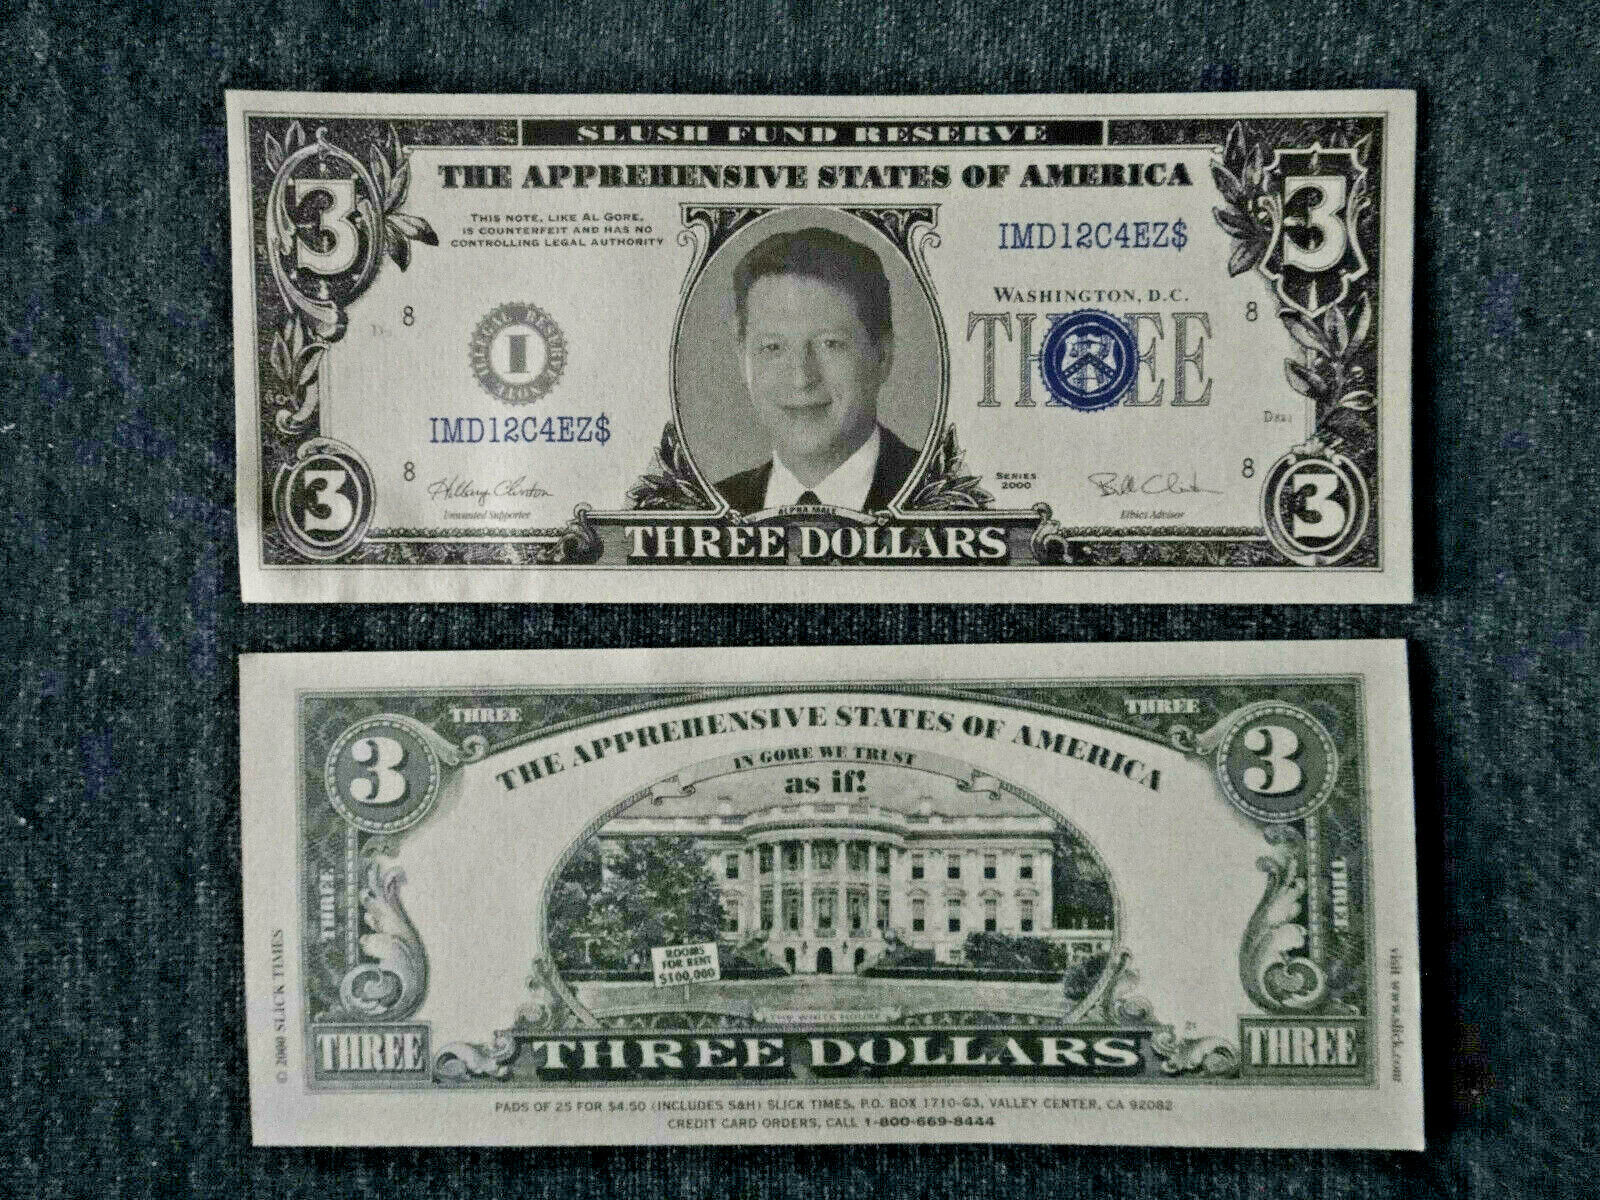 Free: AL GORE COLLECTORS $4 DOLLAR BILL - Other Collectibles -   Auctions for Free Stuff